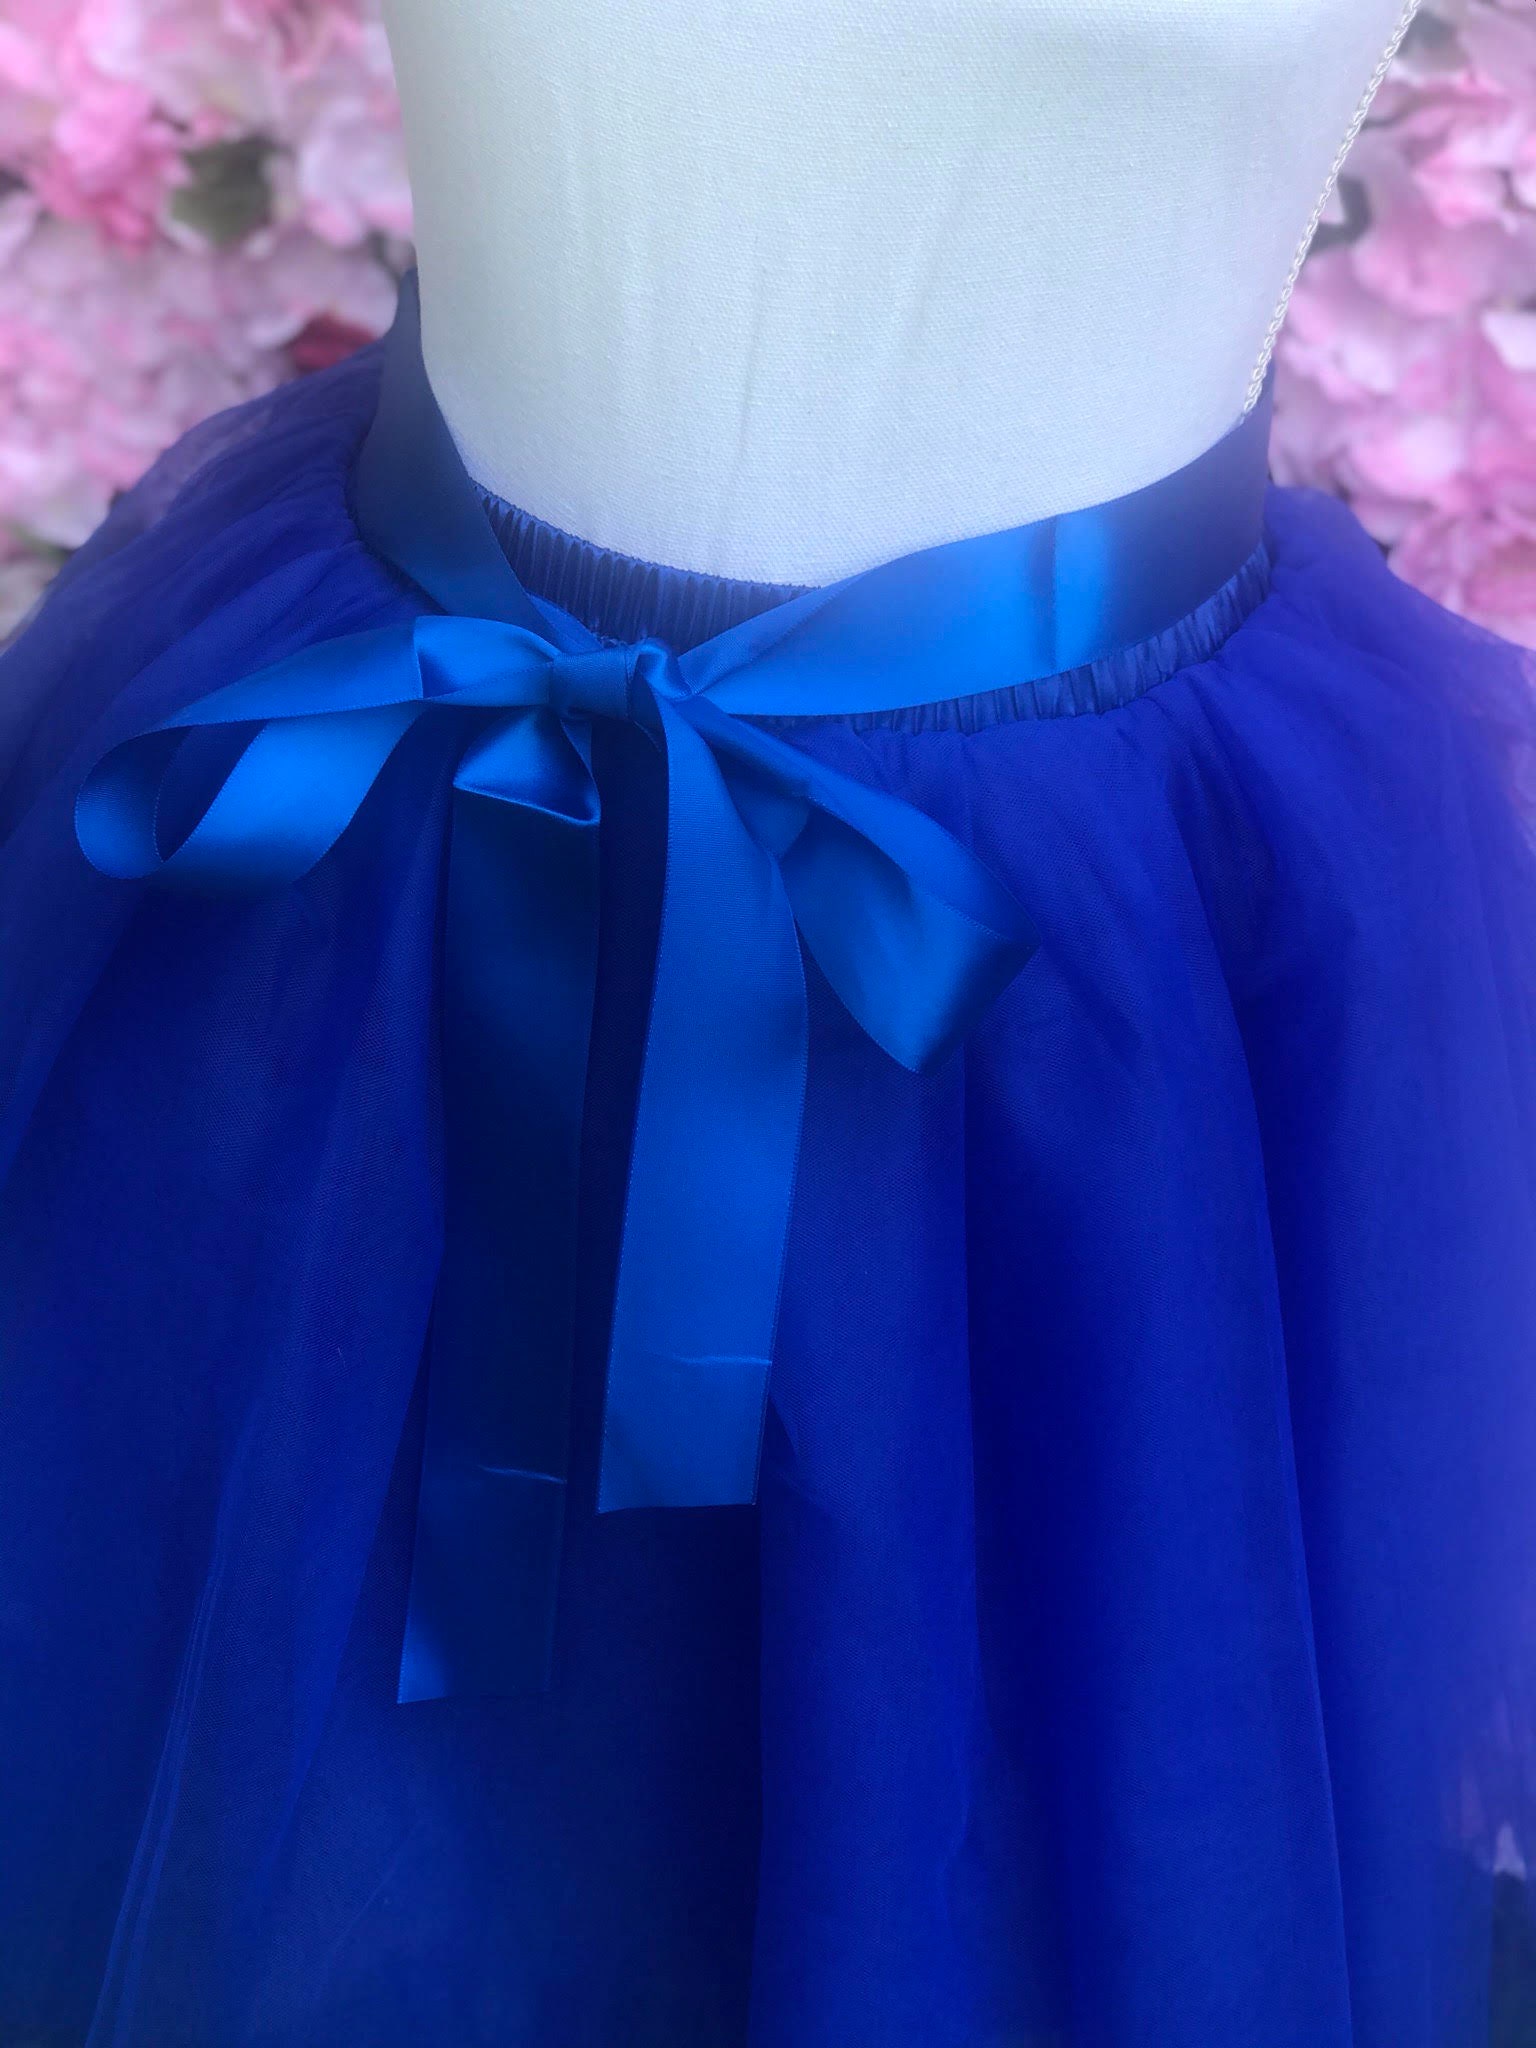 ROYAL BLUE Tulle Tutu skirt Seven layers opaque fluffy thick | Etsy